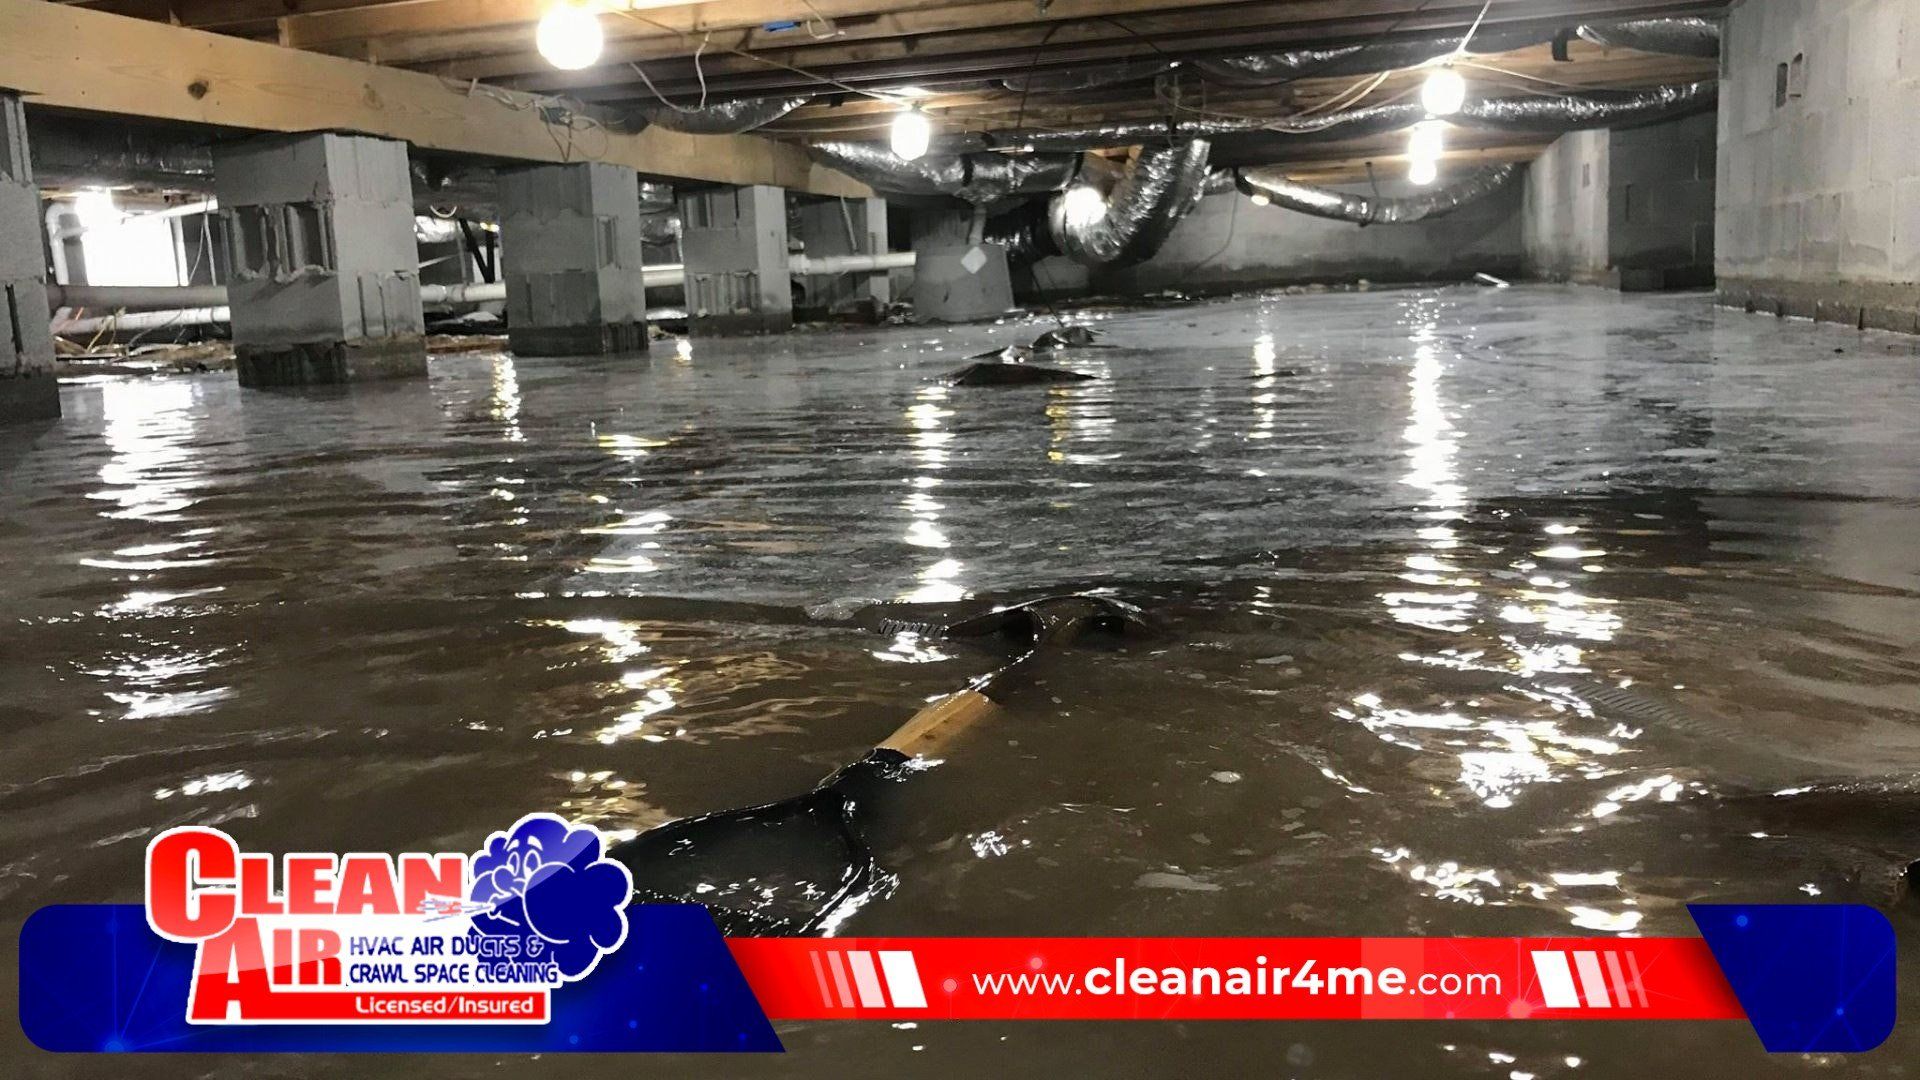 CRAWL SPACE WATER REMOVAL IN GREENSBORO, NC